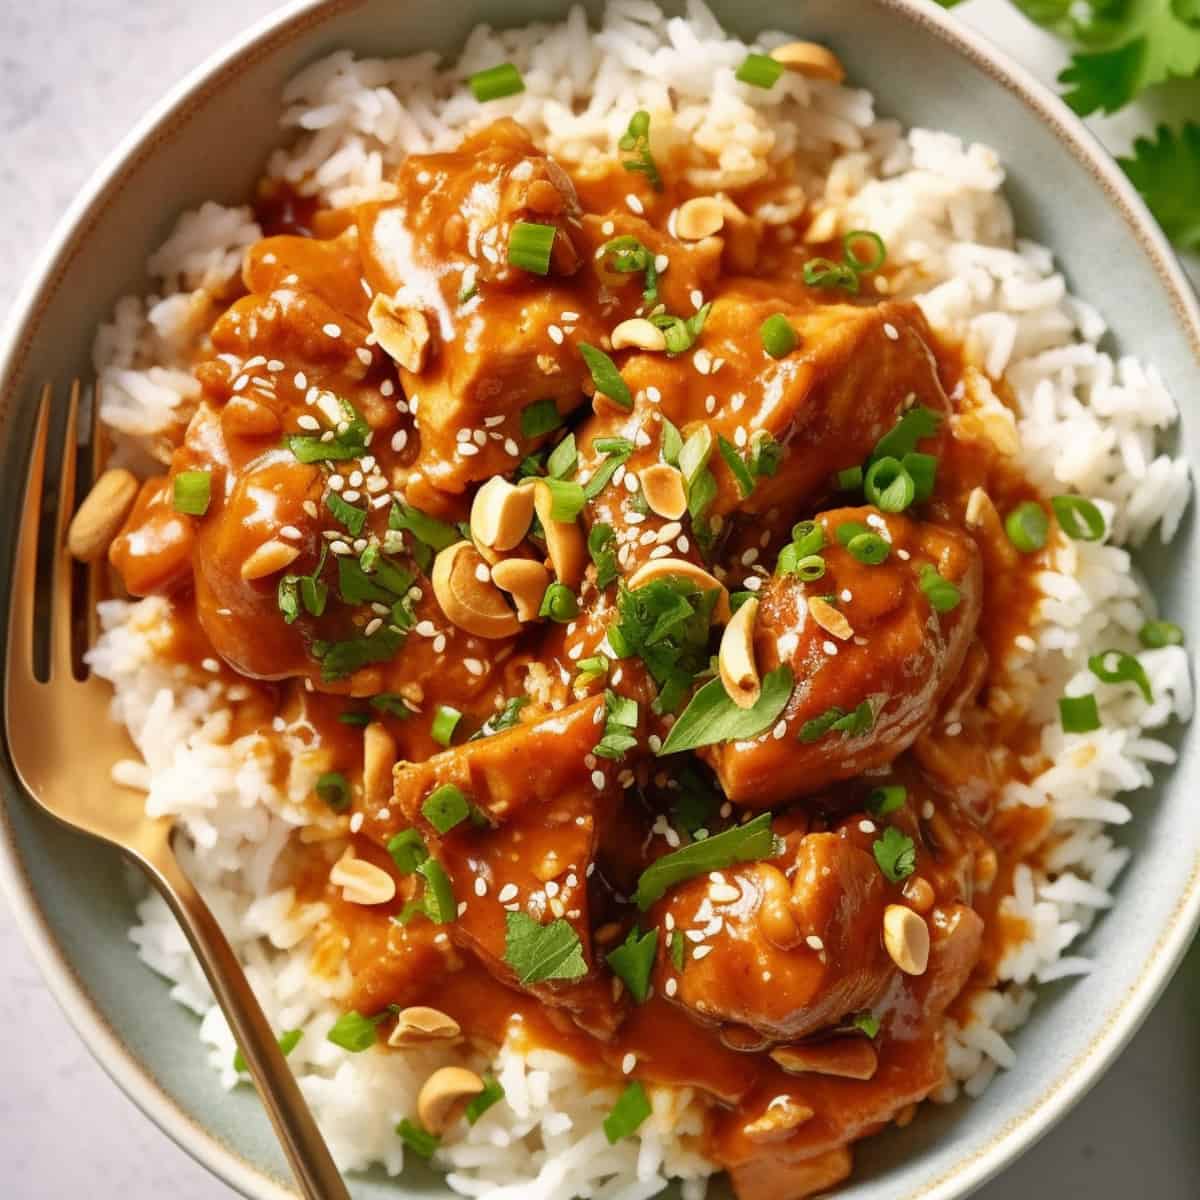 Peanut butter chicken in a white bowl with herbs and peanuts.